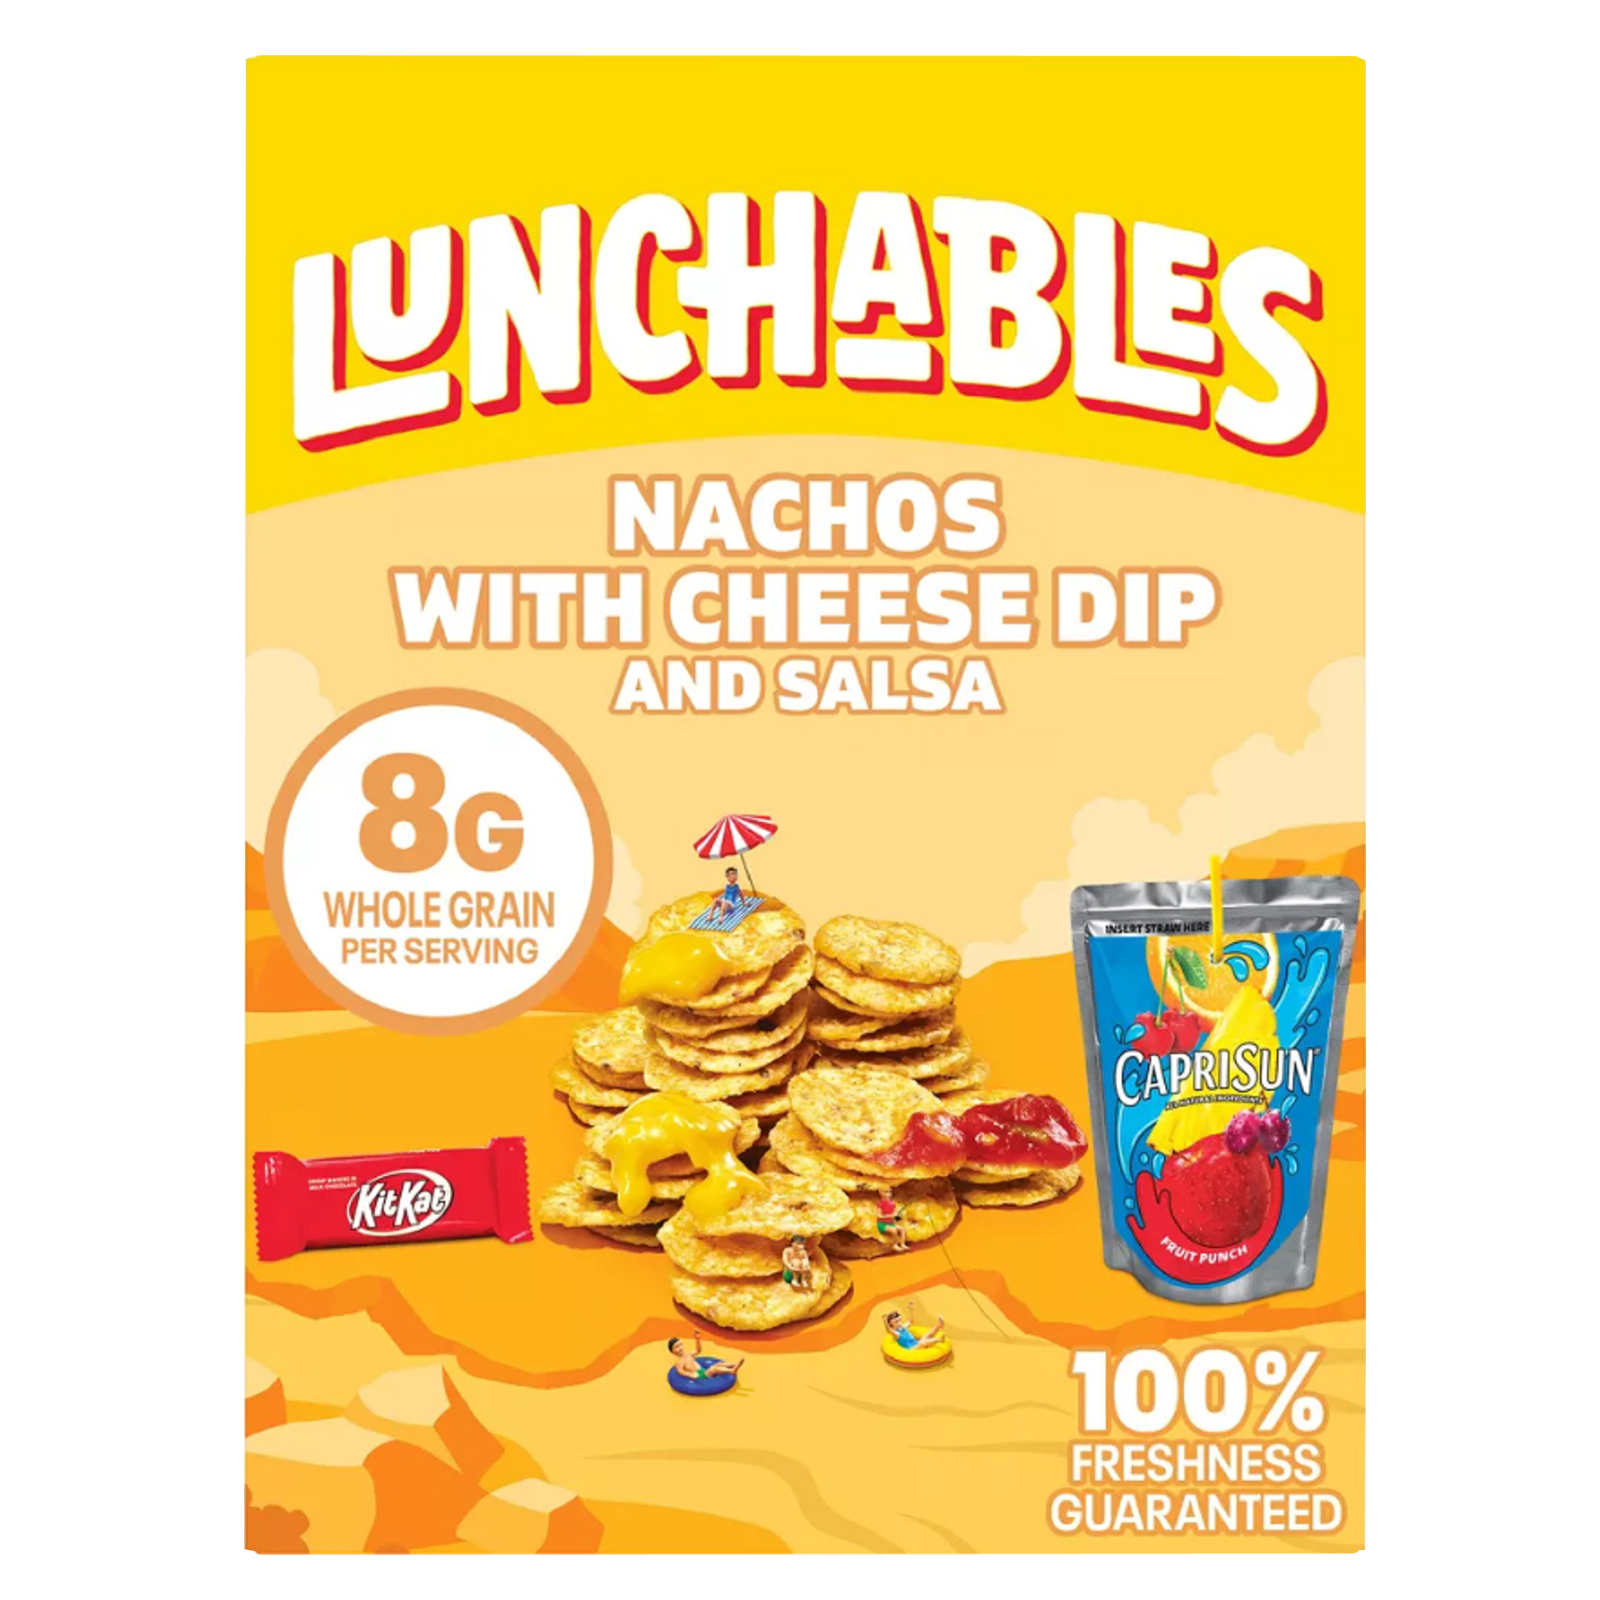 Lunchables Nacho Cheese Dip & Salsa Lunch Combinations with Caprisun - 10.7oz